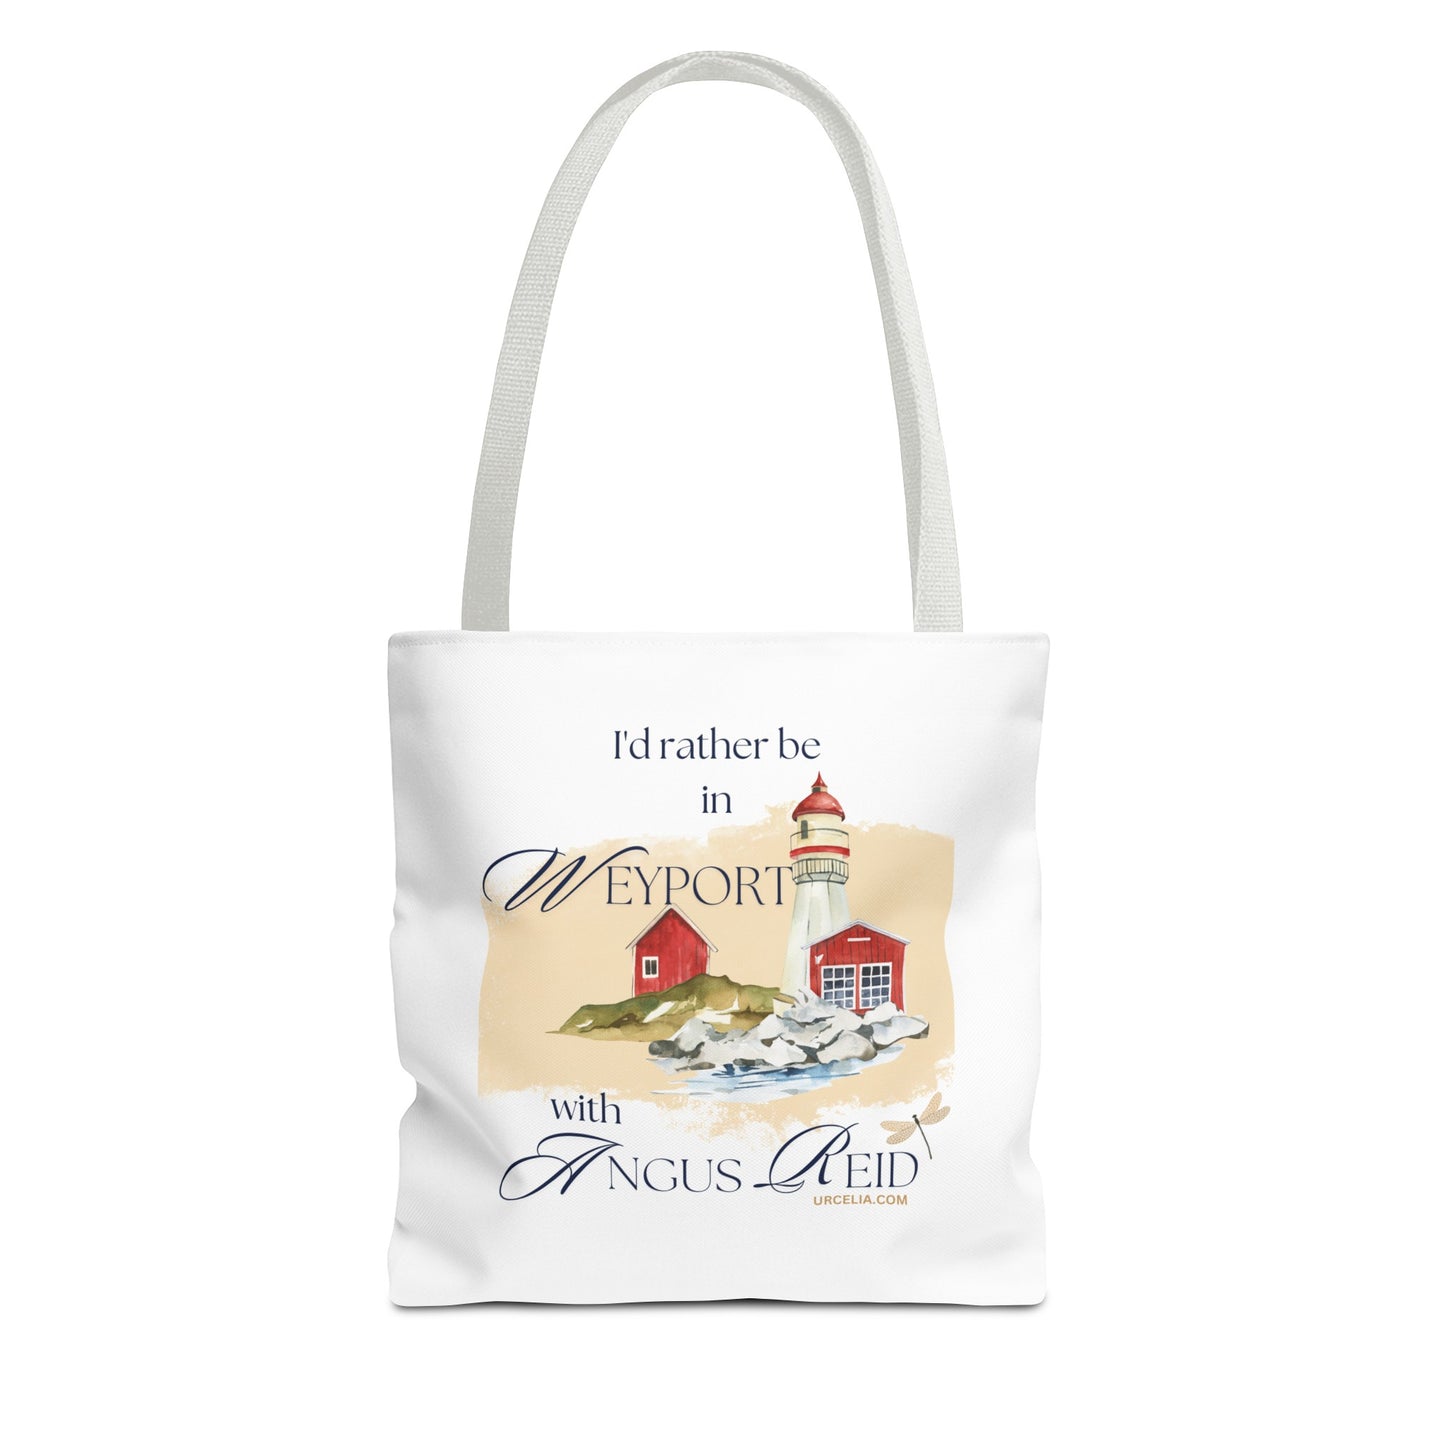 Tote Bag - I'd rather be in Weyport with Angus Reid